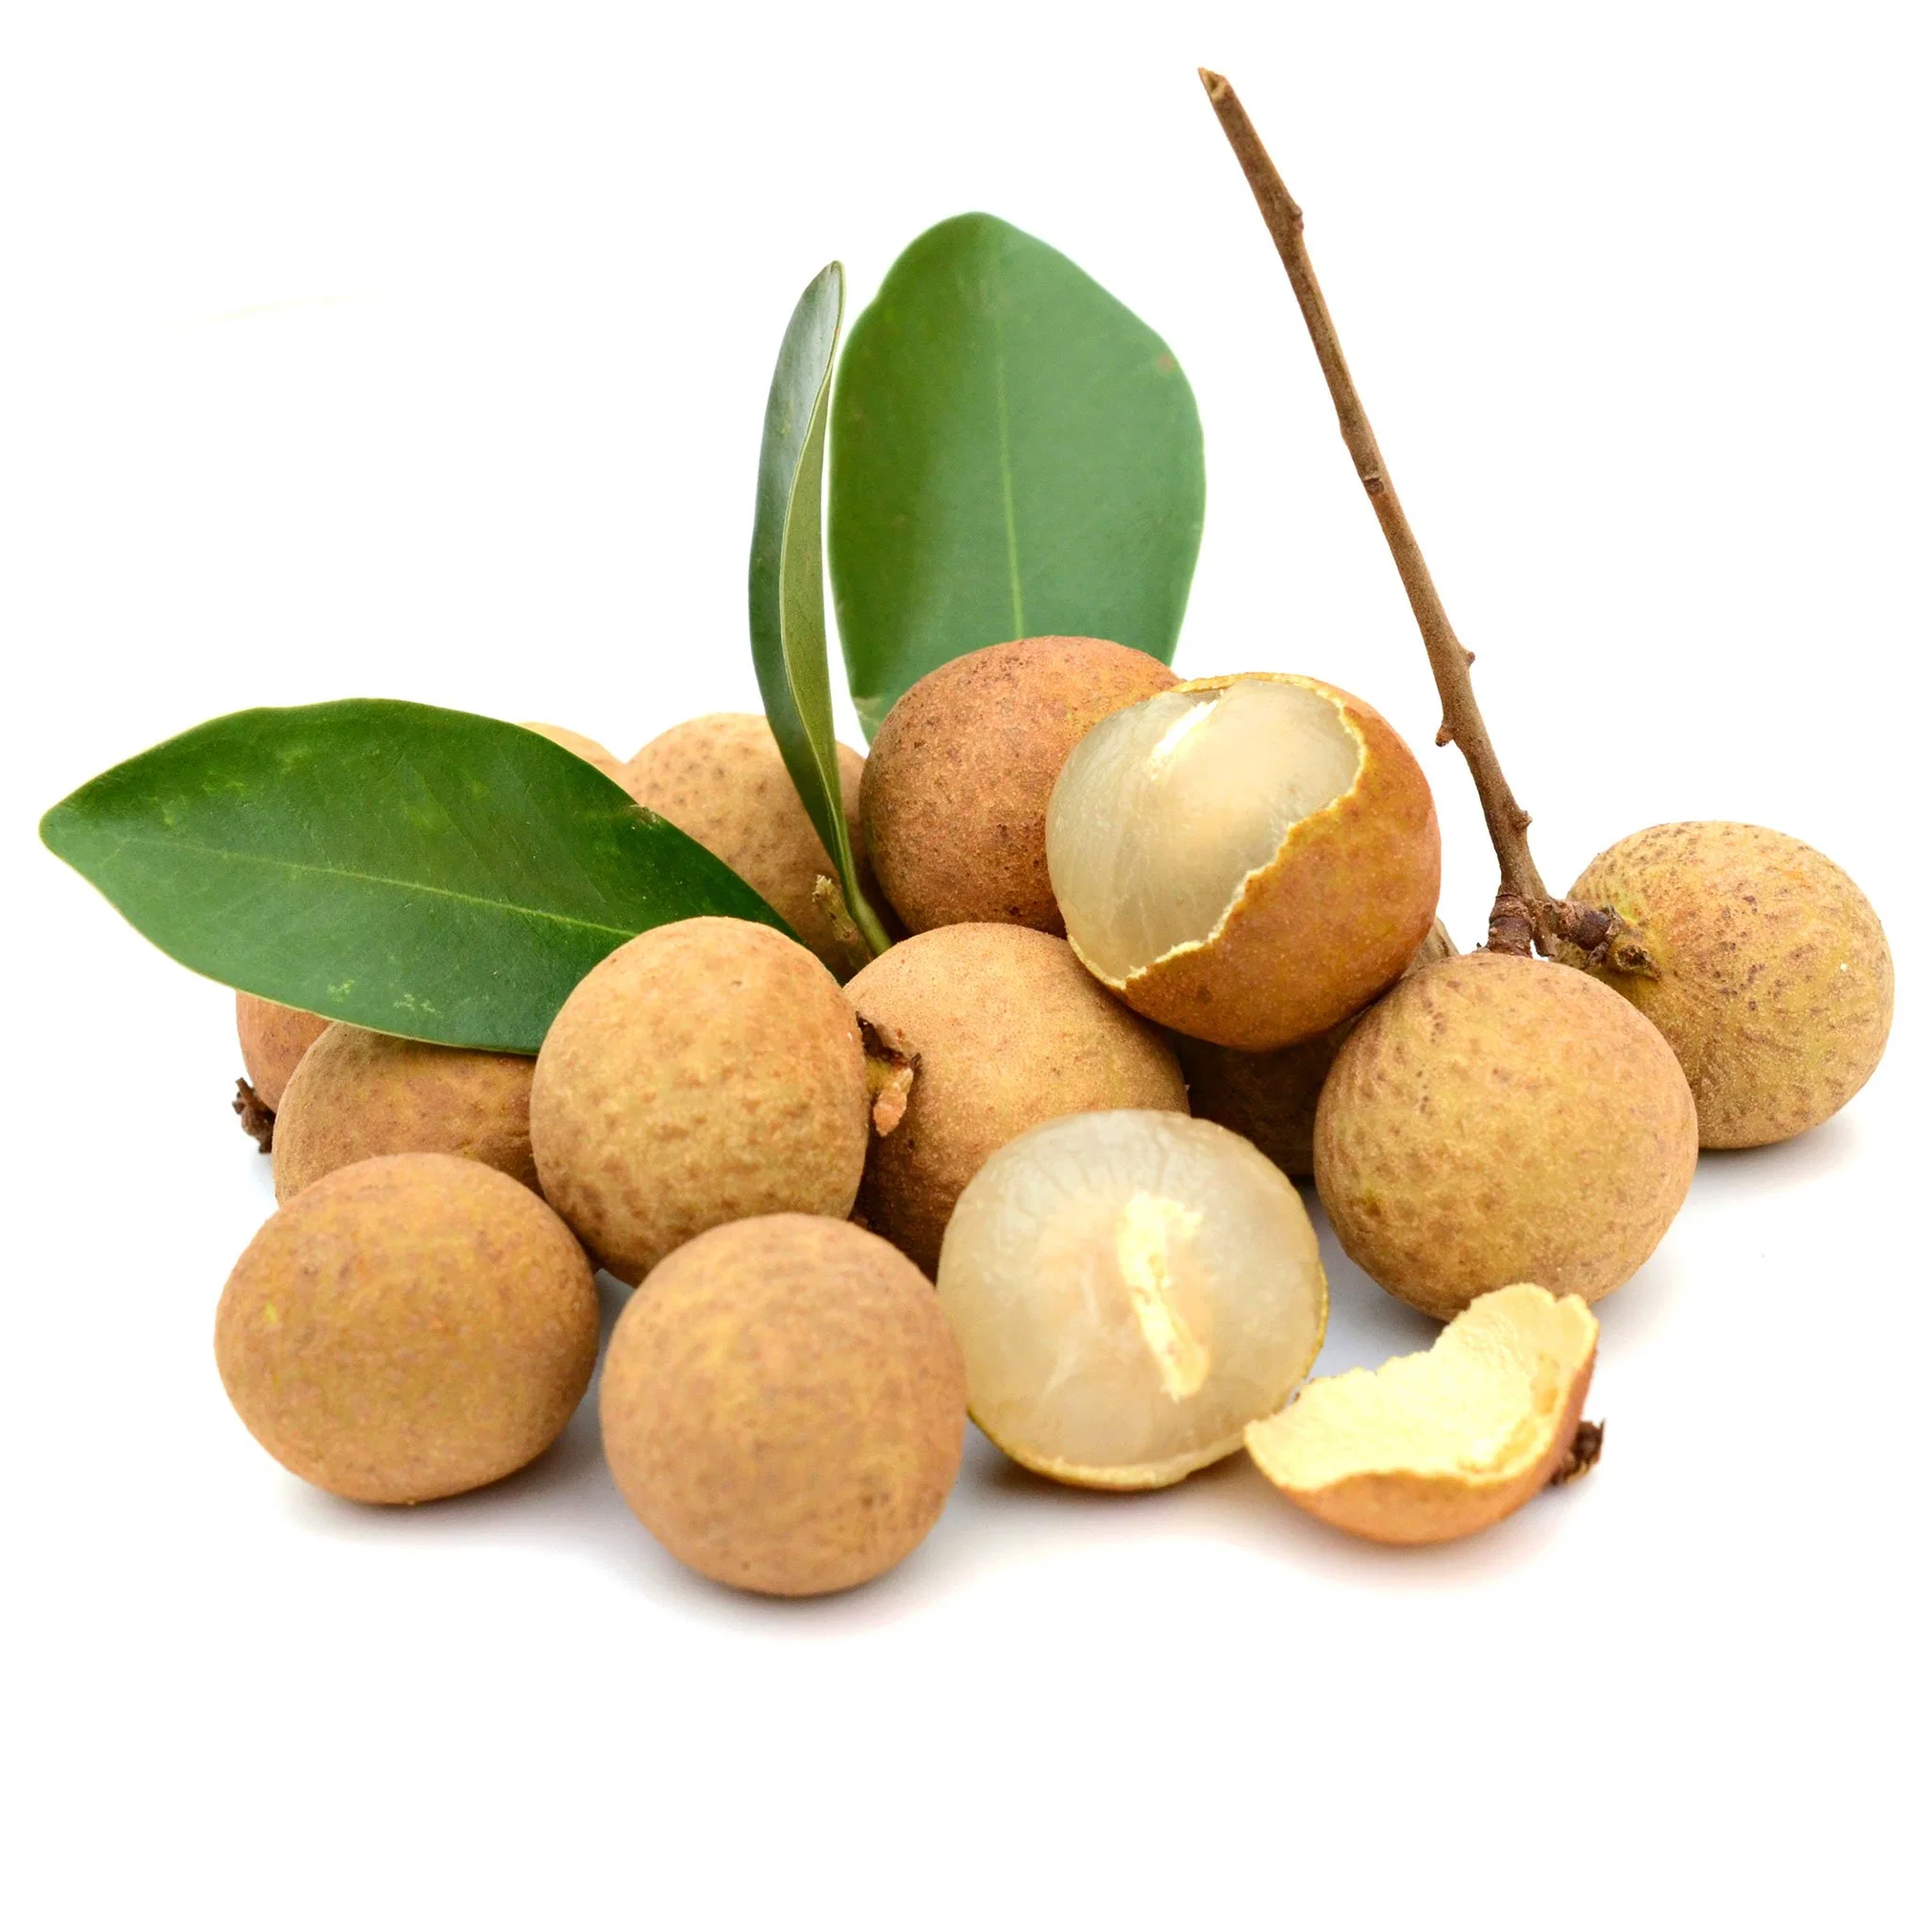 New Season Good Quality Cheap Price 567g Canned Longan Fruit in Syrup Wholesale/Supplierr